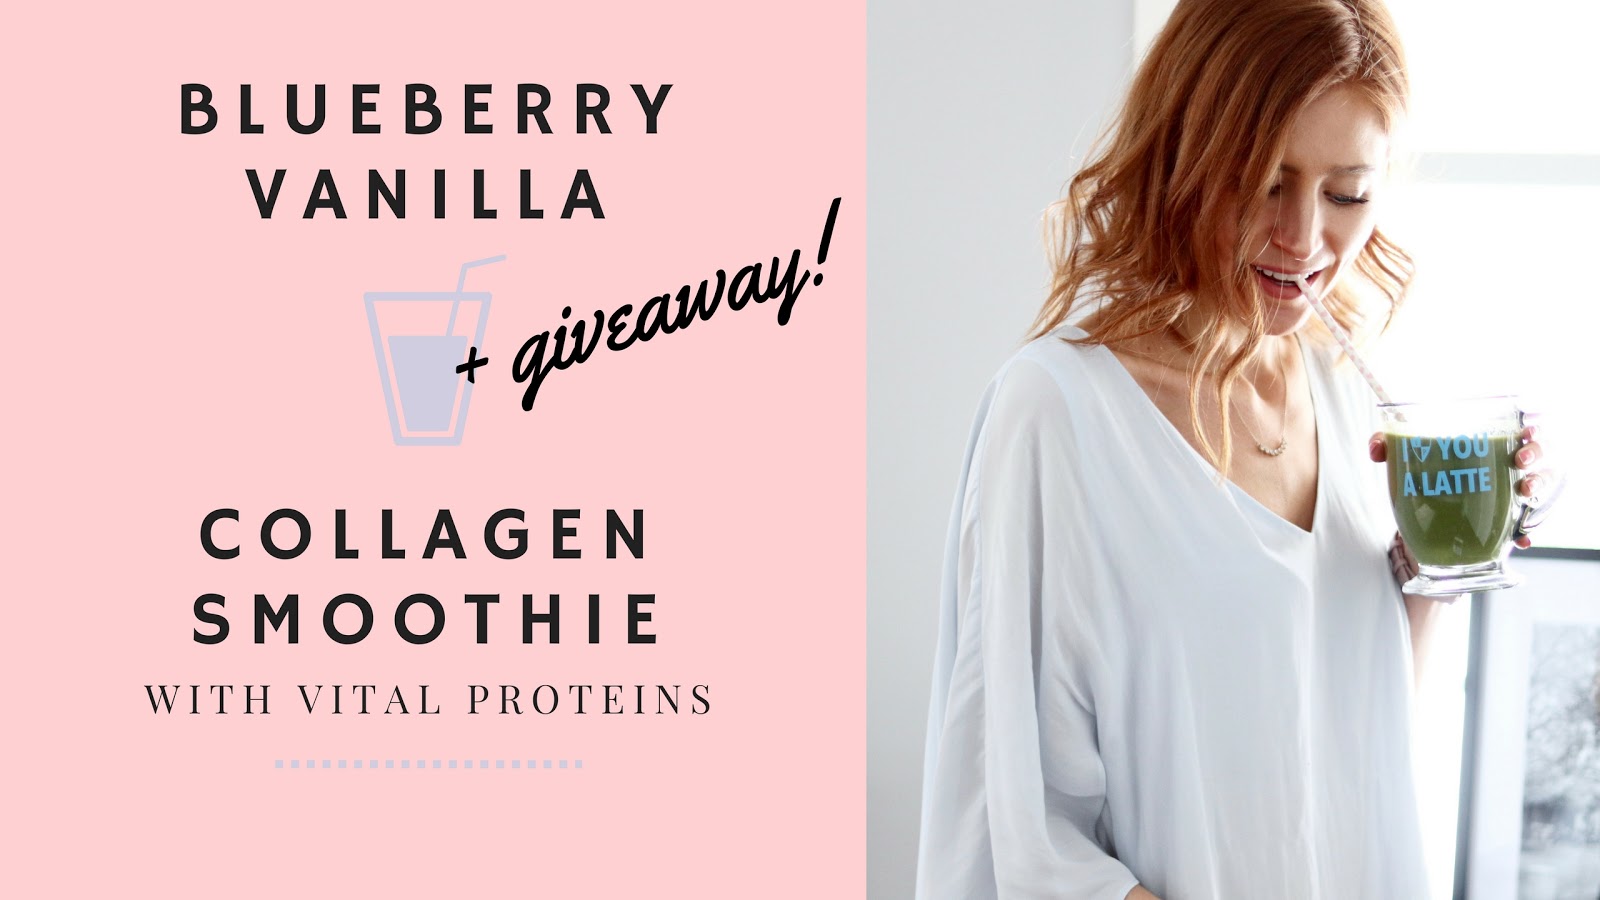 Blueberry Vanilla Collagen Smoothie with Vital Proteins + Giveaway, How to use collagen in smoothie